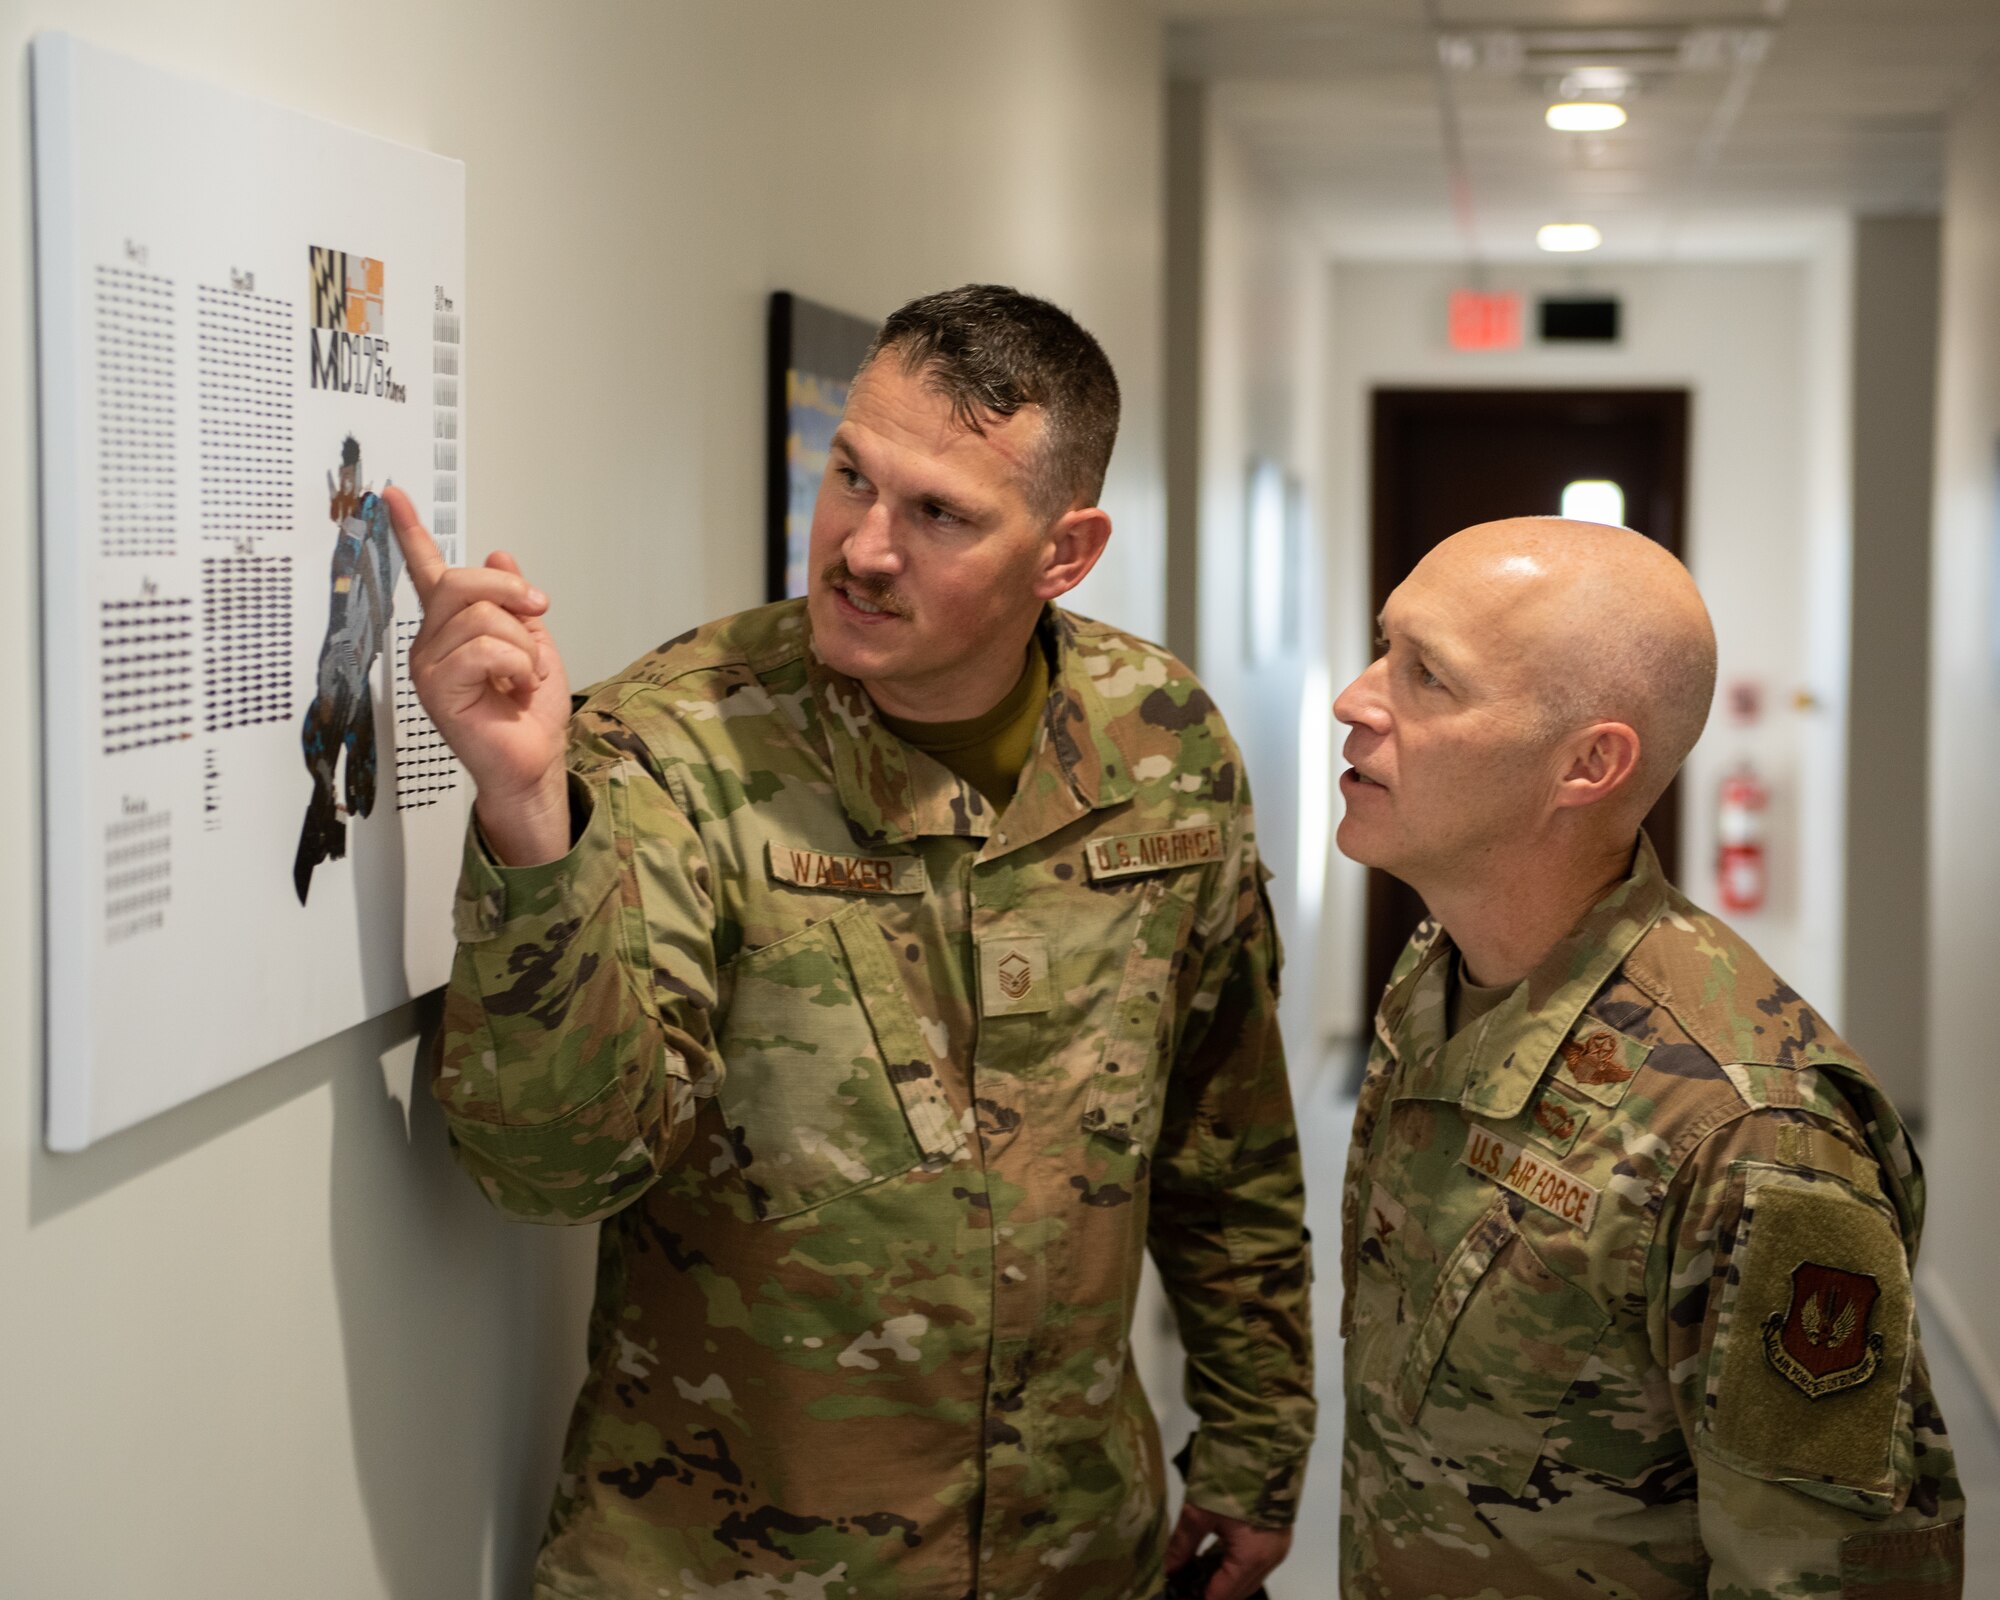 Master Sgt. Wesley Walker, 39th Maintenance Squadron munitions materiel flight chief, shows Col. Calvin Powell, 39th Air Base Wing commander, a newly printed graphic after the 39th MXS munitions flight building dedication ceremony at Incirlik Air Base, Türkiye, Dec. 19, 2022. The 39th MXS munitions flight building was designed to provide a streamlined means of communication within the ammunitions flight and assist Airmen in building camaraderie and teamwork. The building also provides better protection for munitions assets controlled by the flight and consolidates six sections into a single building, increasing productivity for current and future Airmen. (U.S. Air Force photo by Senior Airman David D. McLoney)